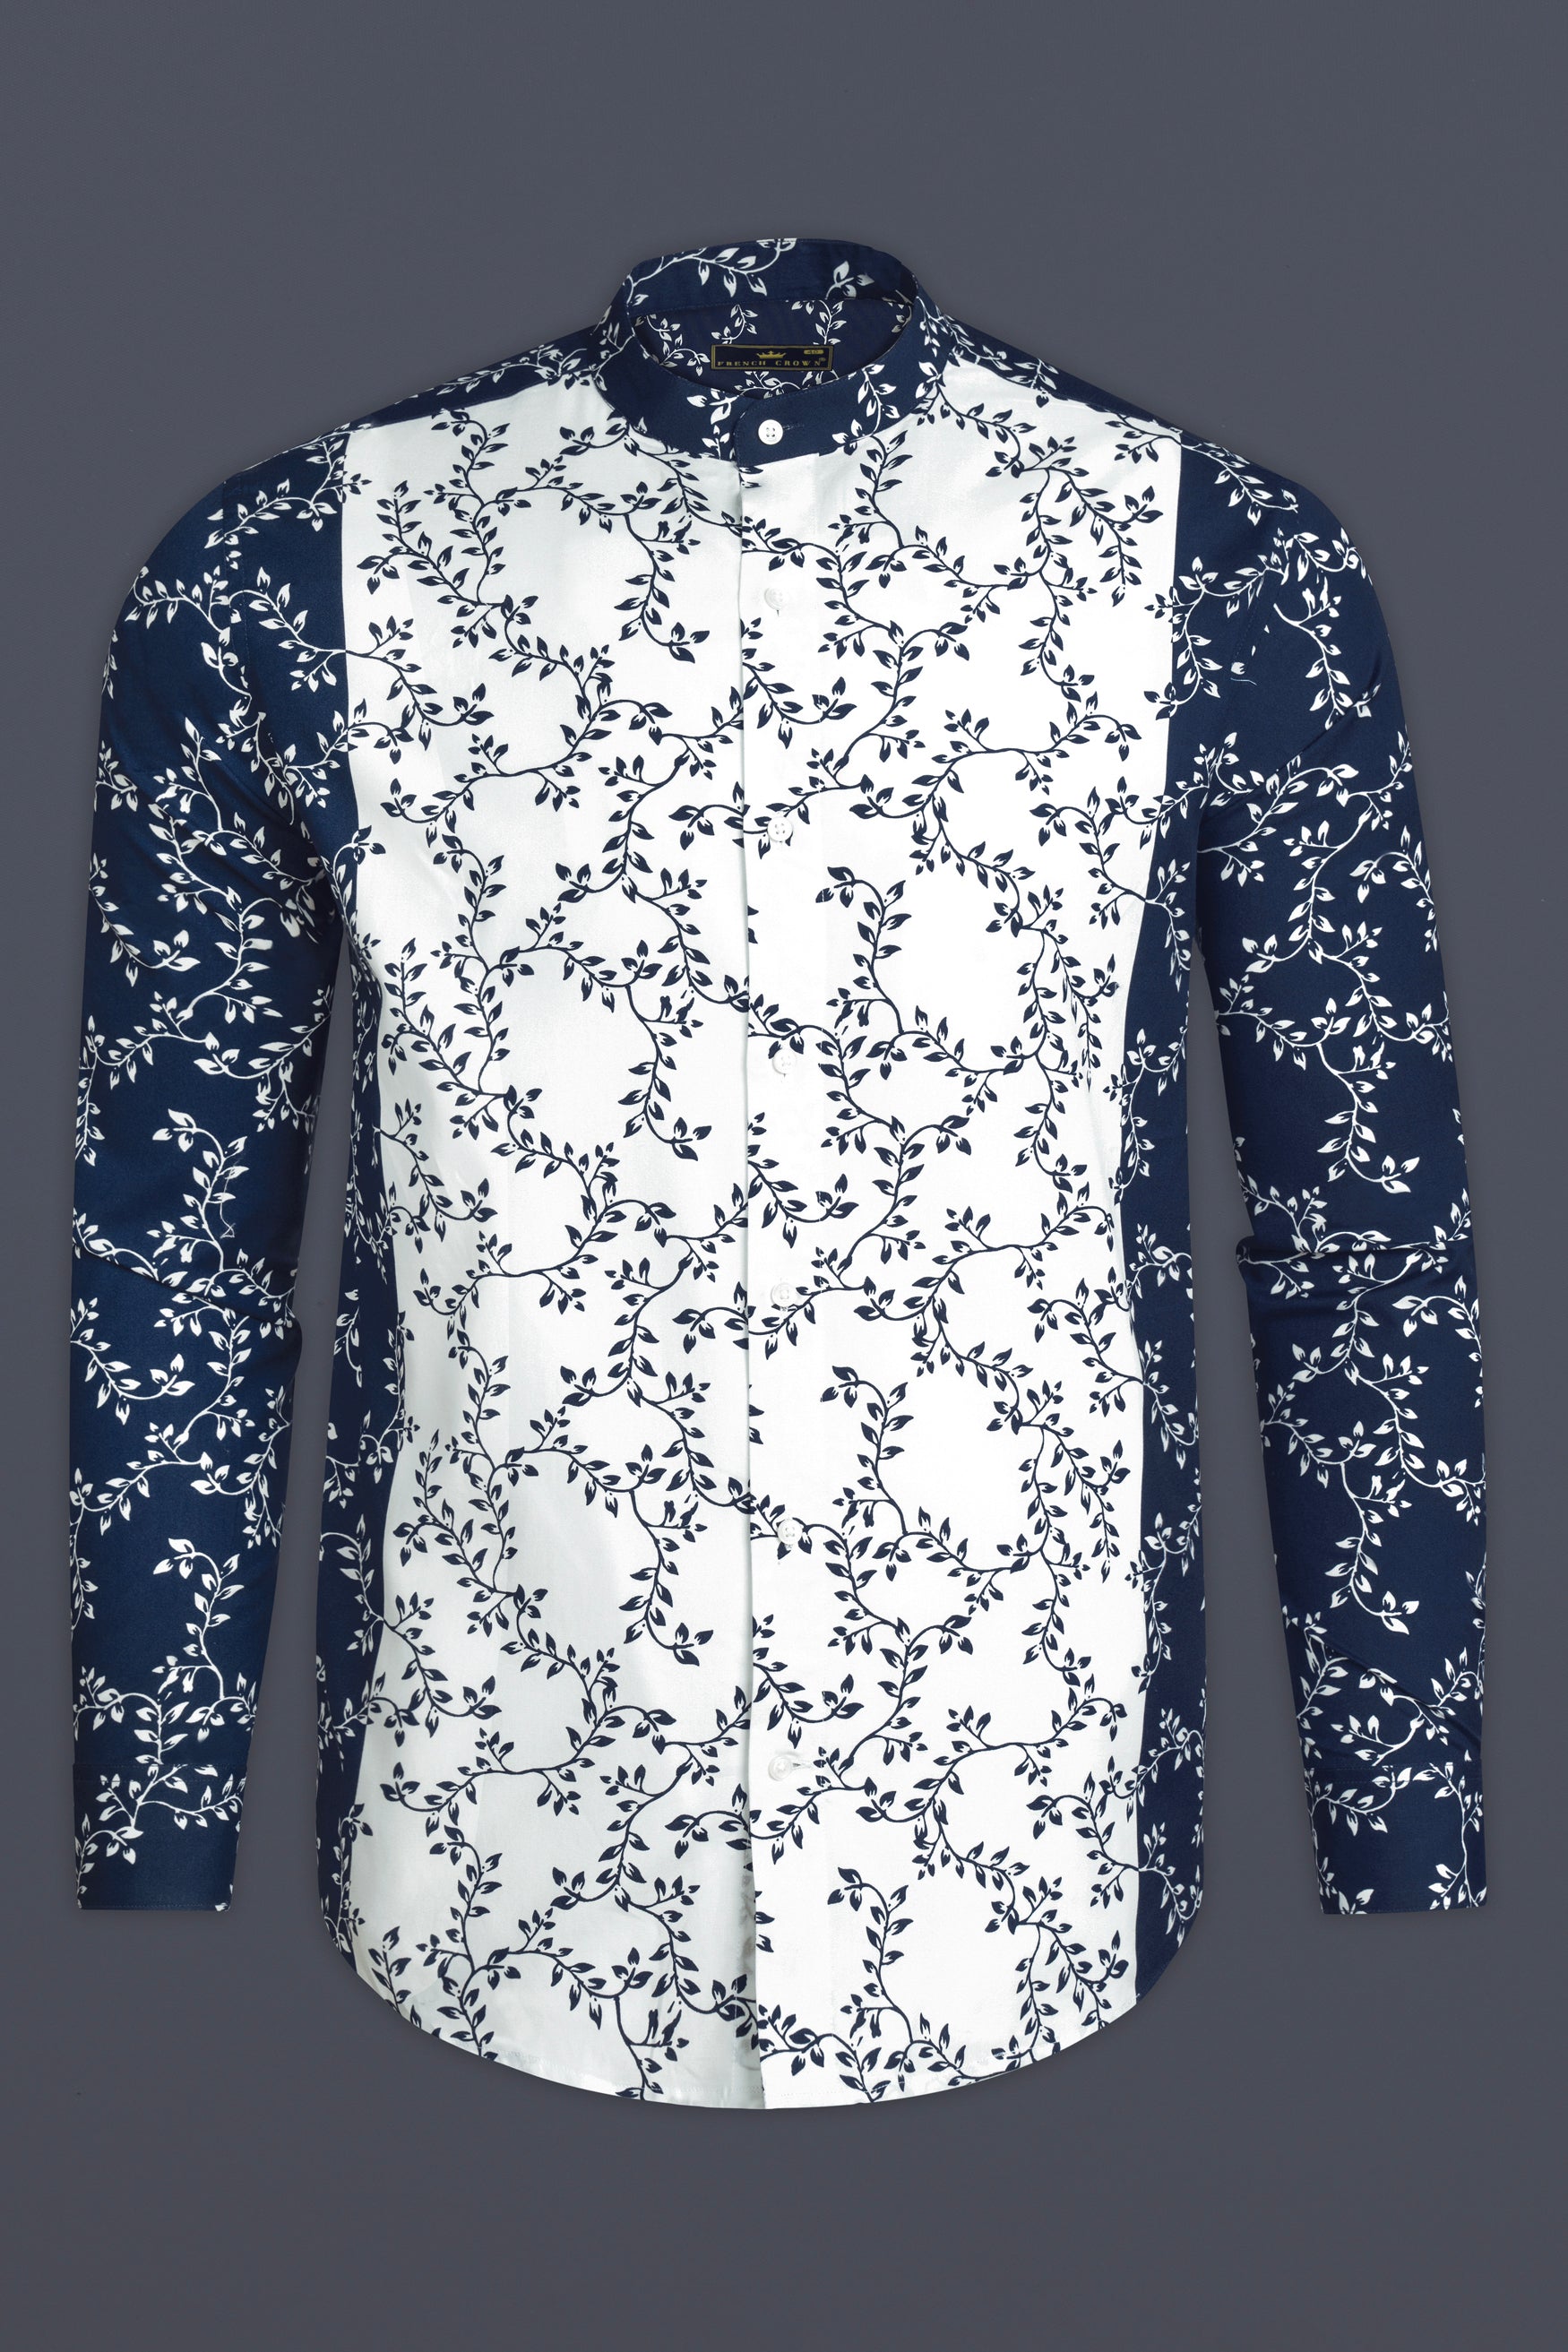 Bright White and Mirage Blue Leaves Printed Poplin Giza Cotton Shirt